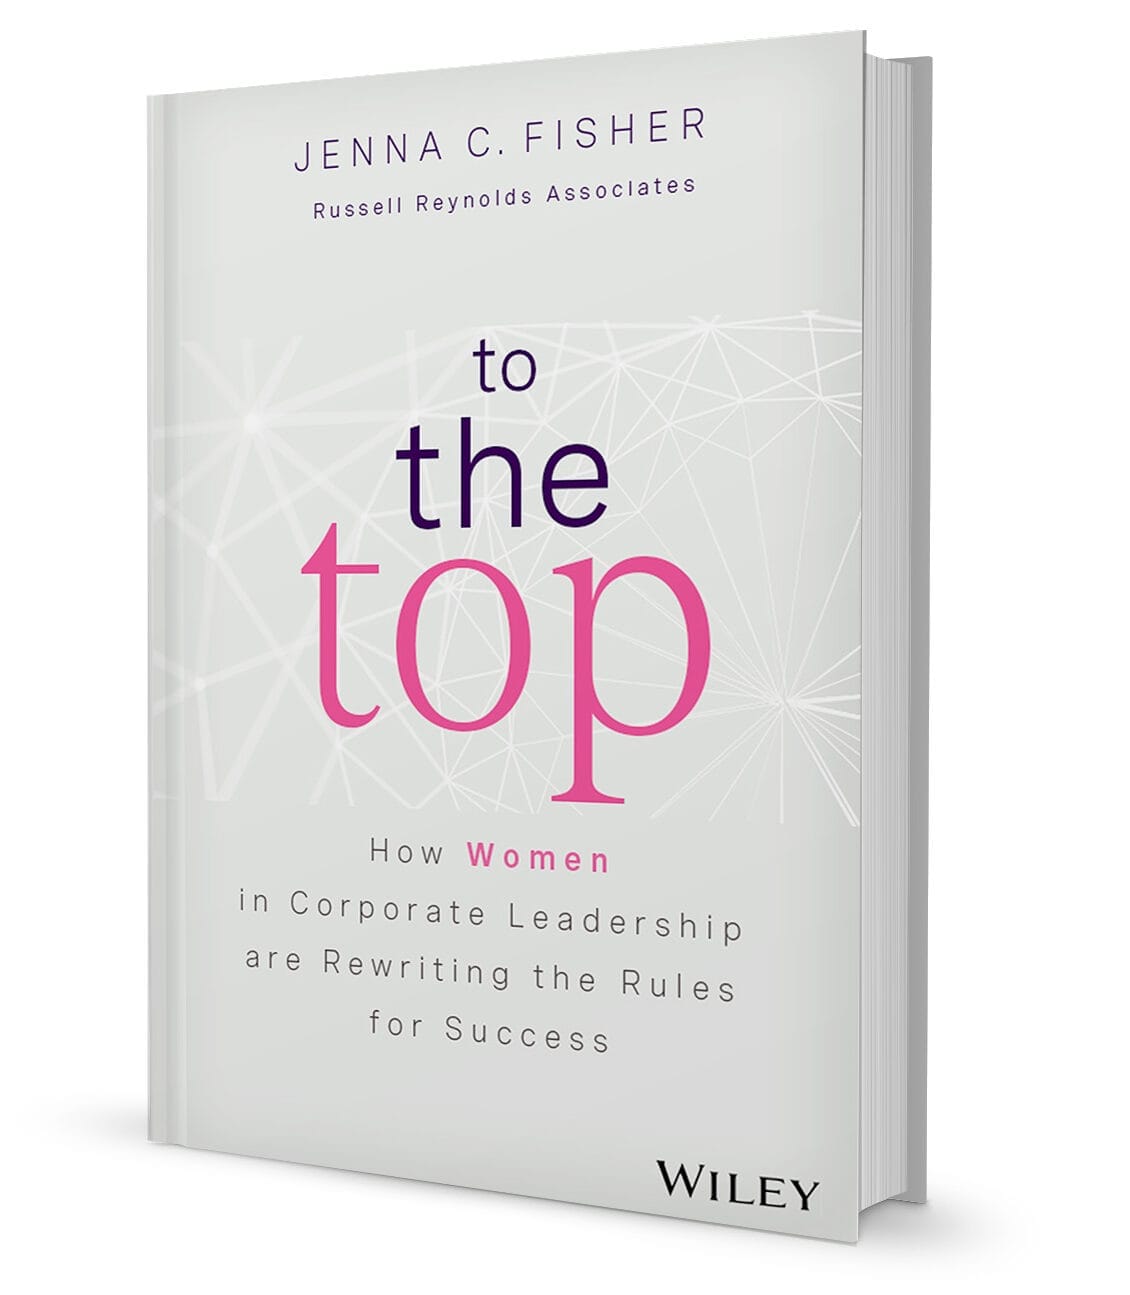 Cover for the book "To the Top".